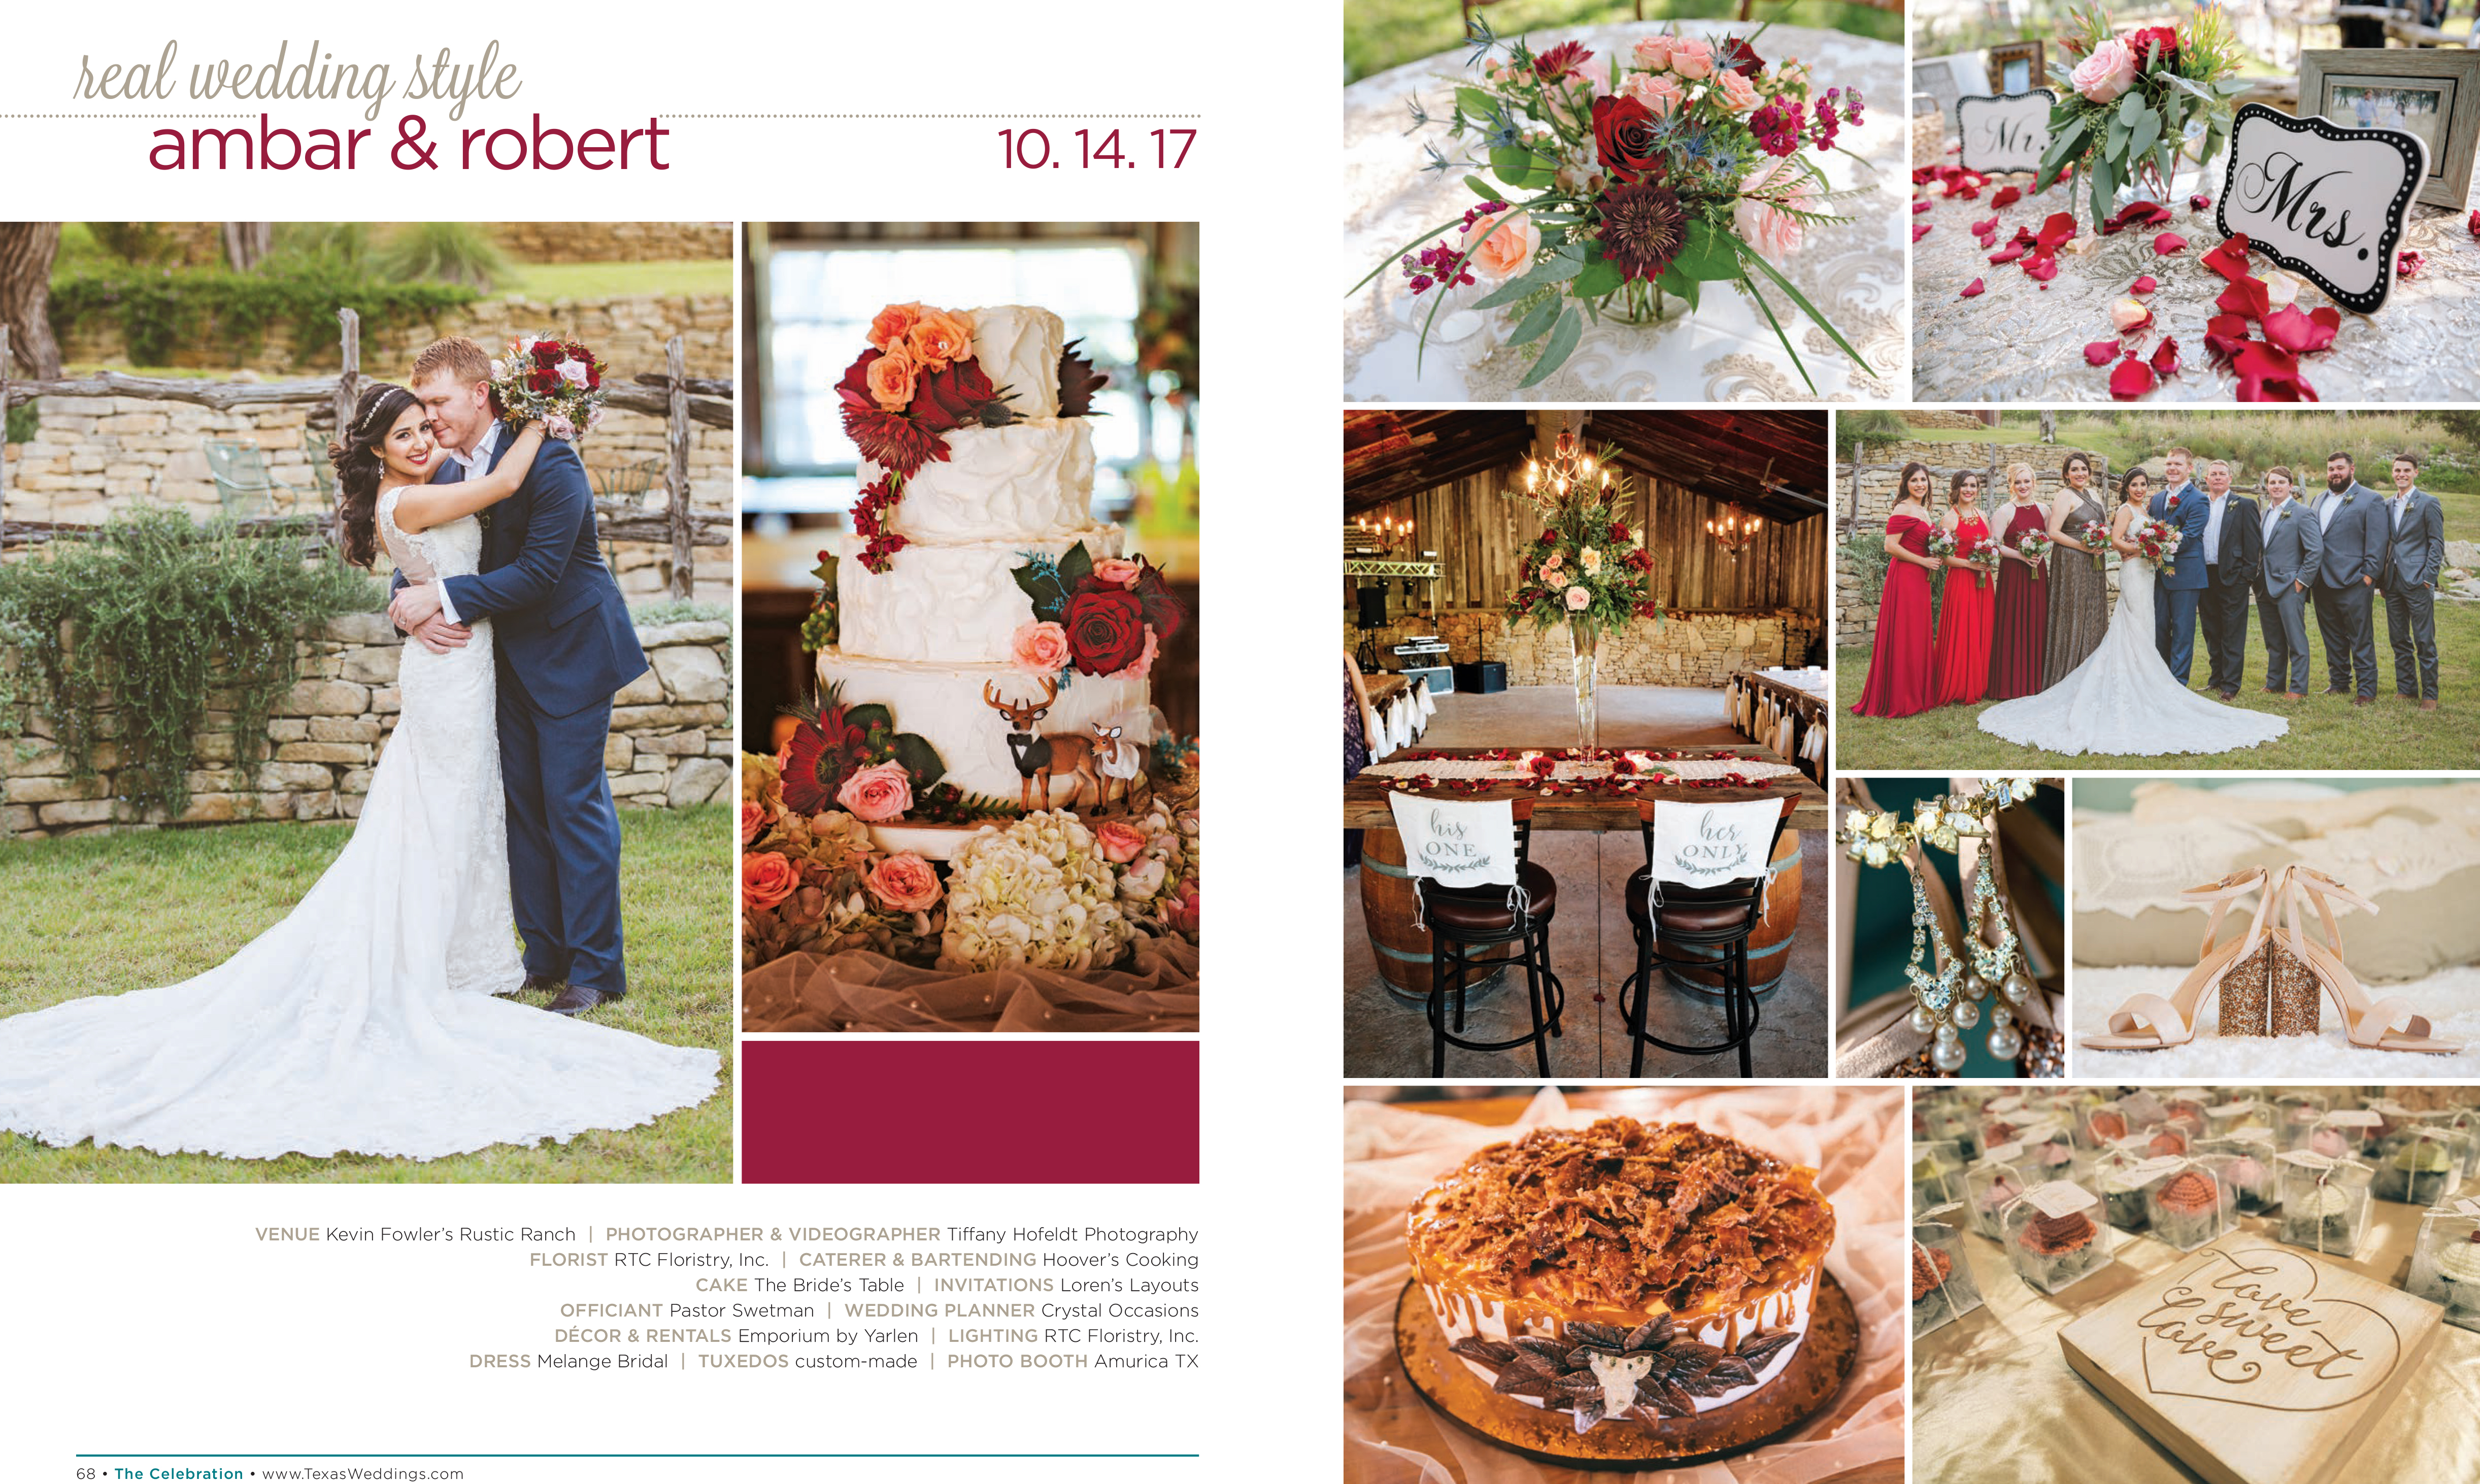 Ambar & Robert in their Real Wedding Page in the Spring/Summer 2019 Texas Wedding Guide